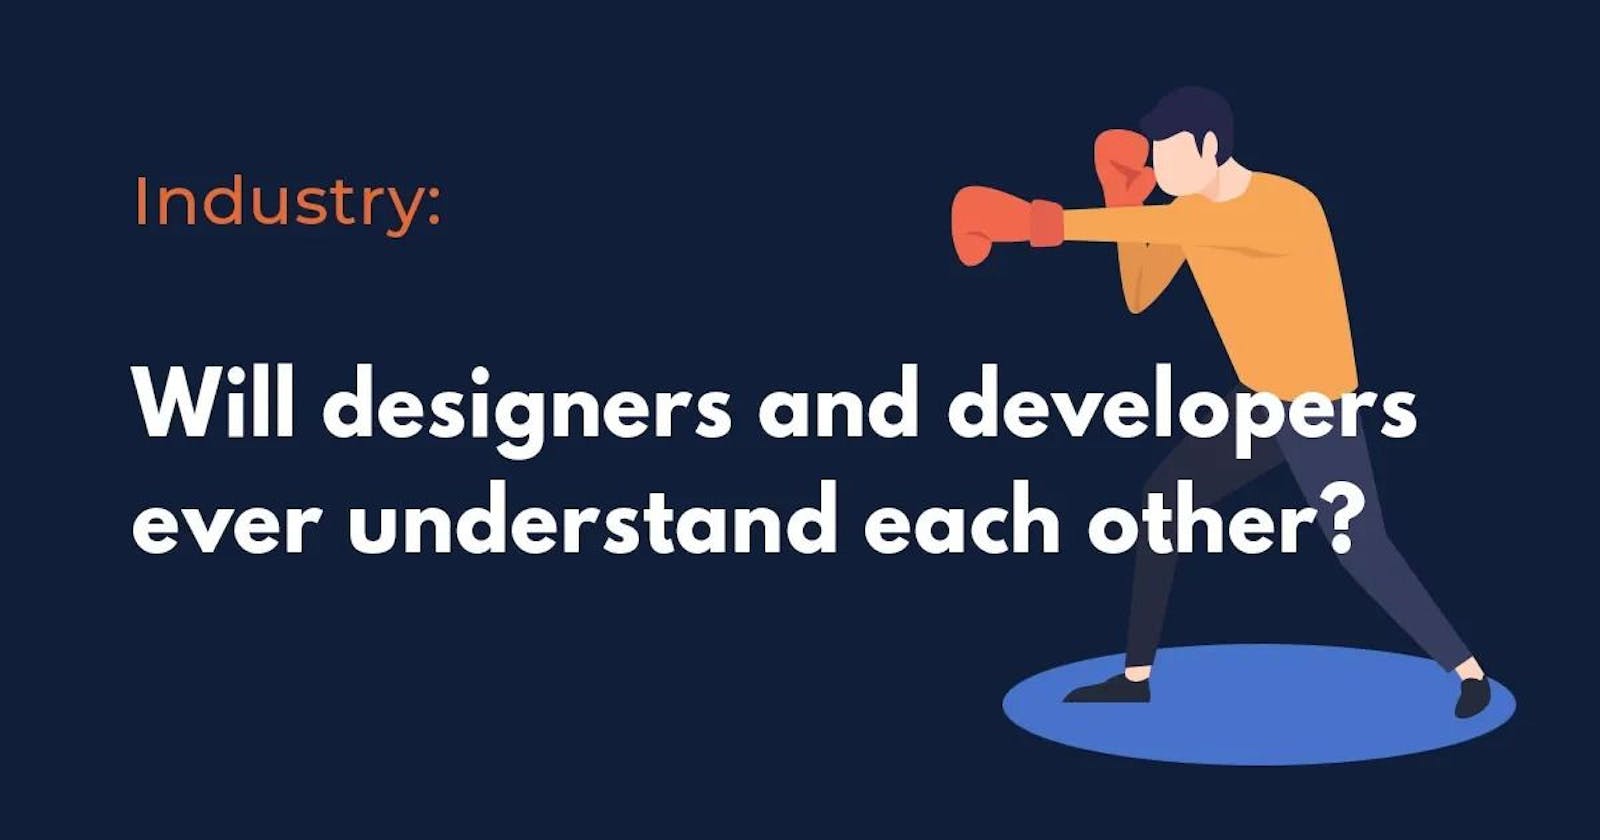 Why can’t developers and designers get along?